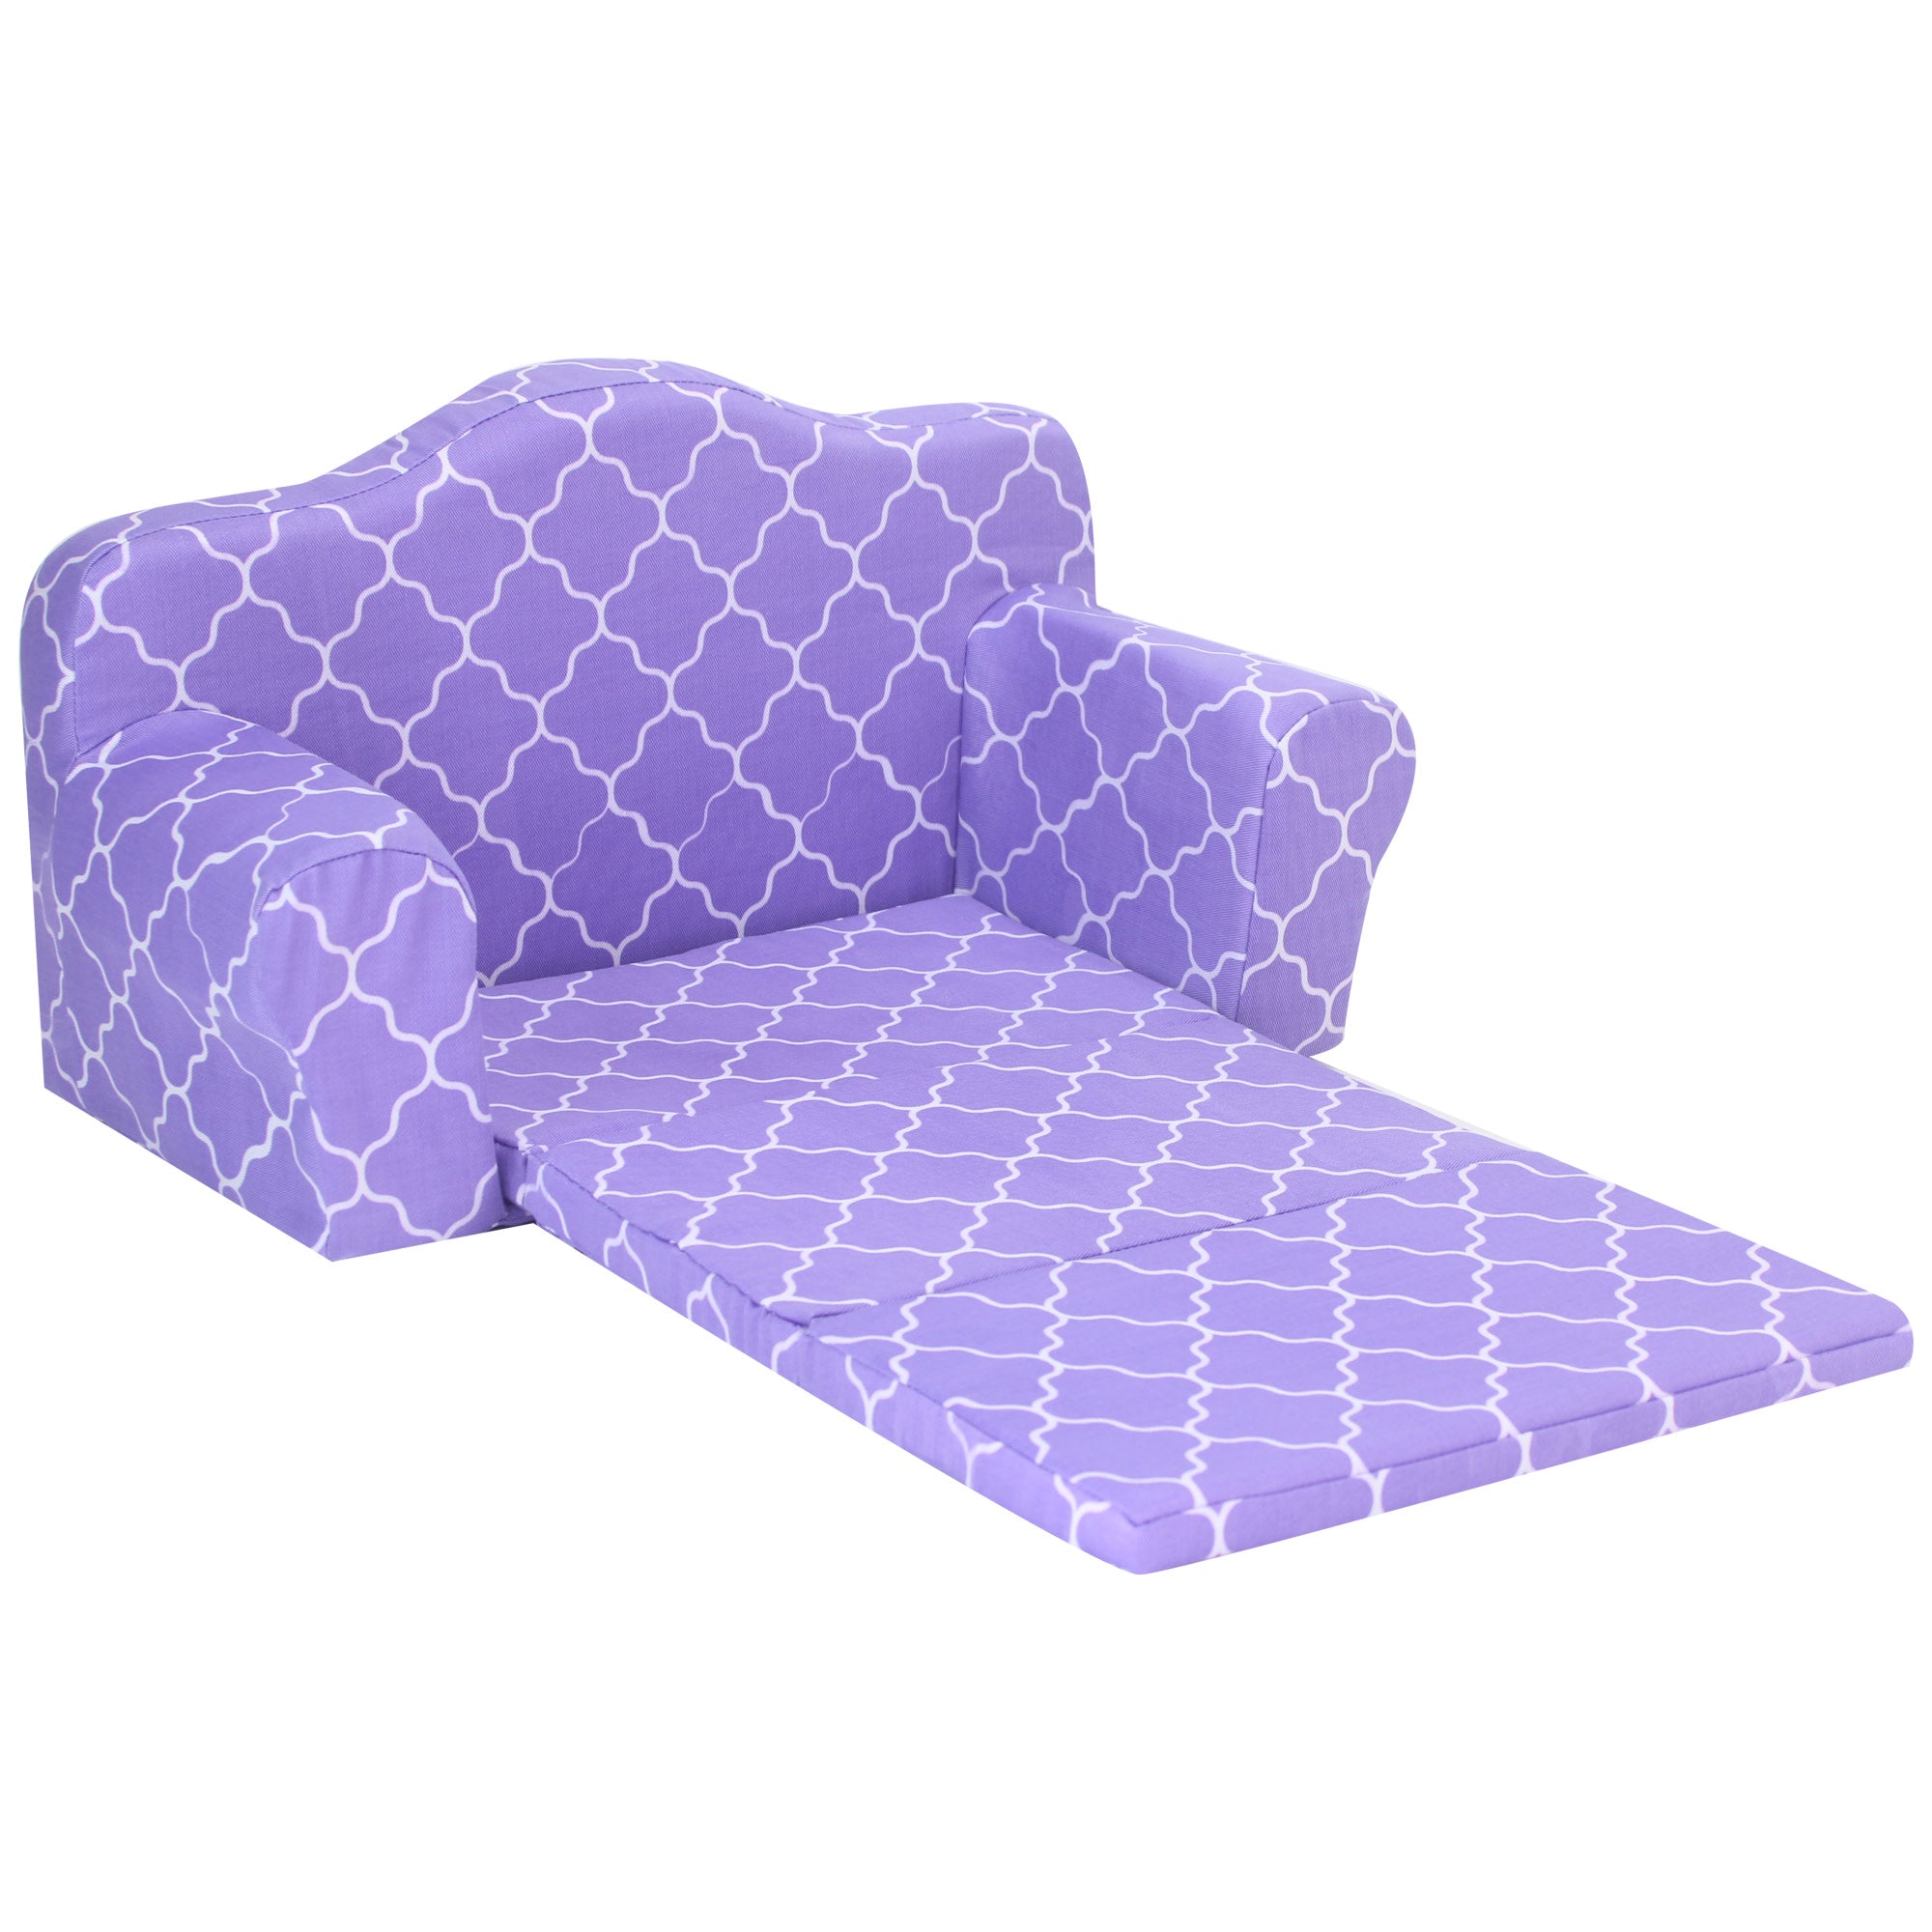 Sophia’s Plush Pull Out Couch/Double Bed Sized for 18" Dolls, Purple